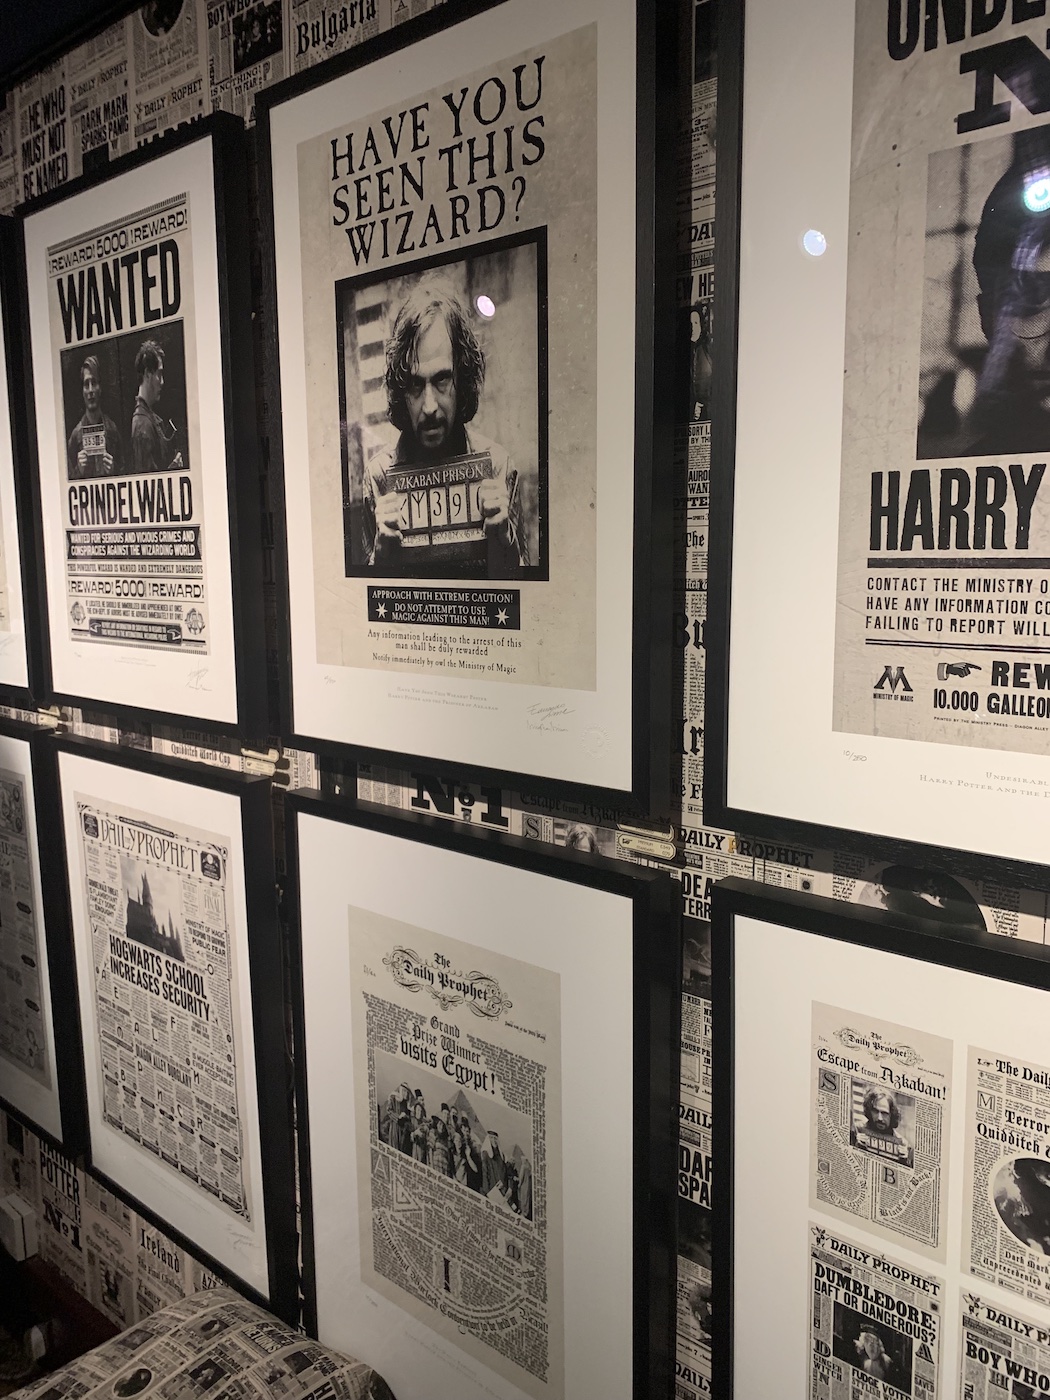 The wanted posters used in Wizarding World movies often appear on popular merch items.